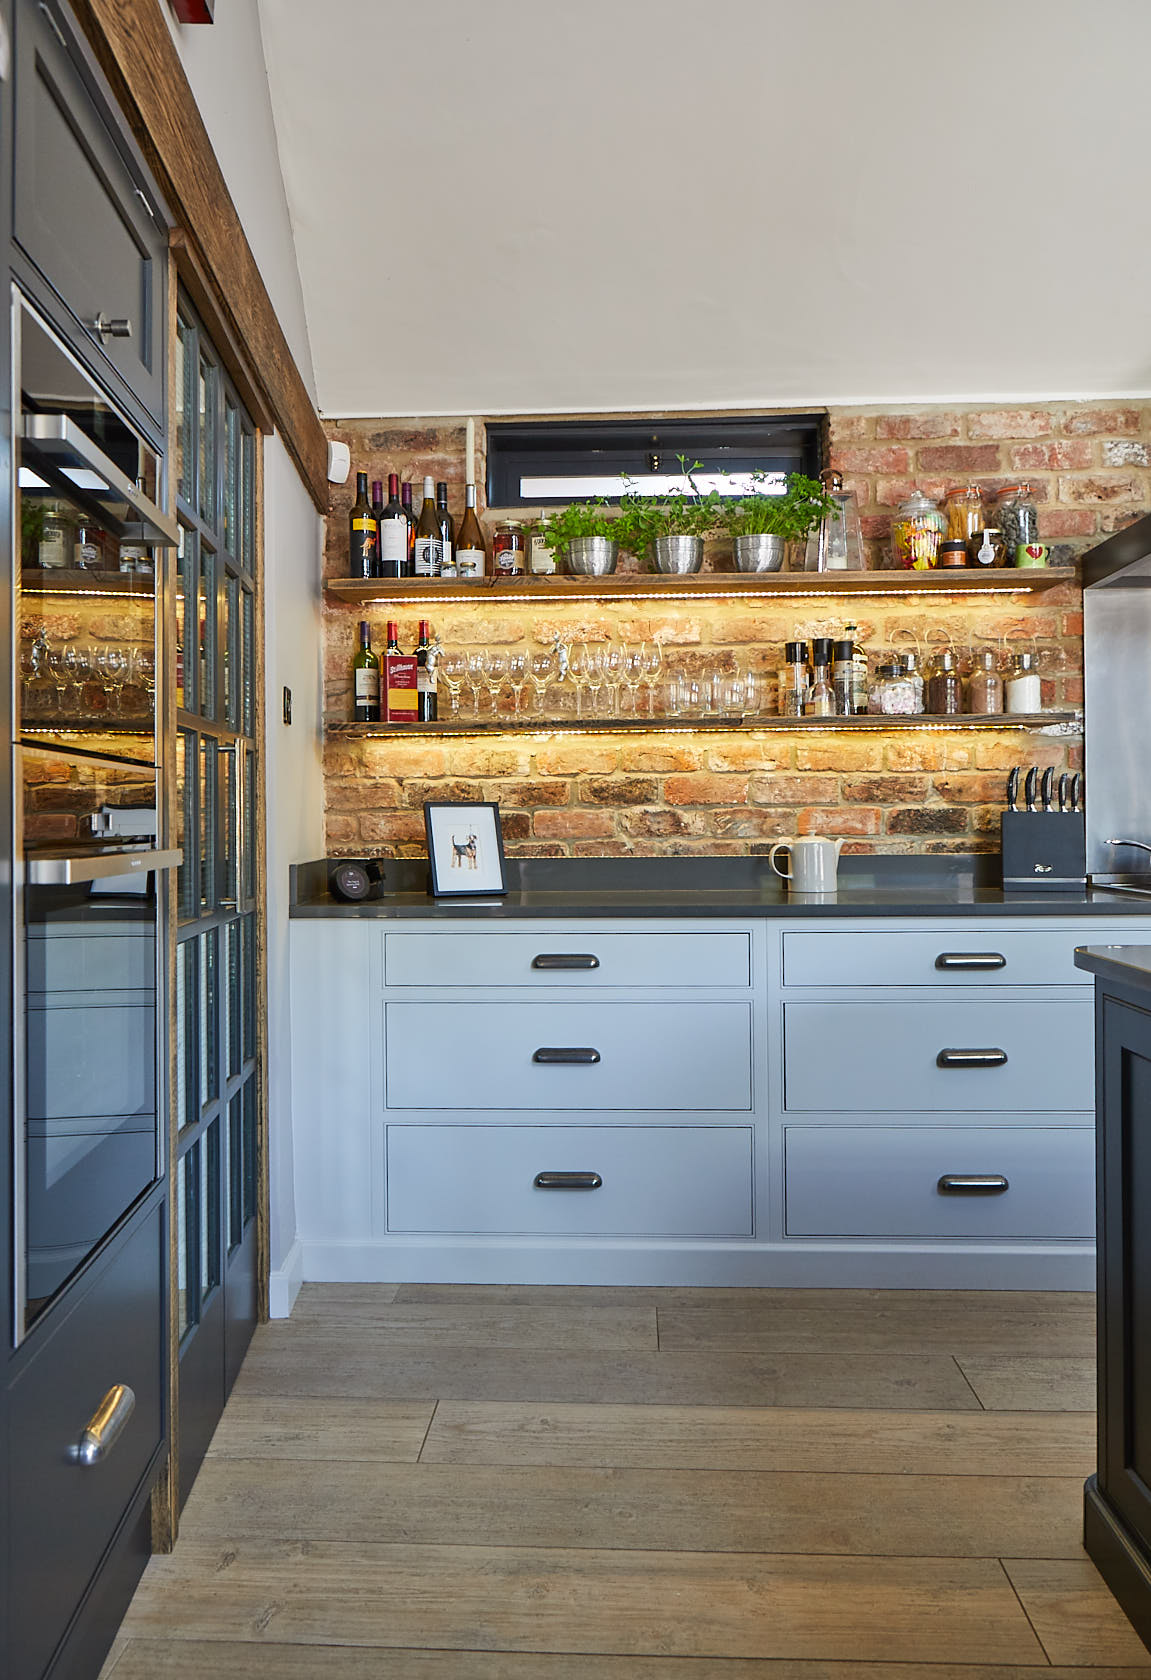 Light grey pan drawers below exposed brick wall with open rustic oak shelves above